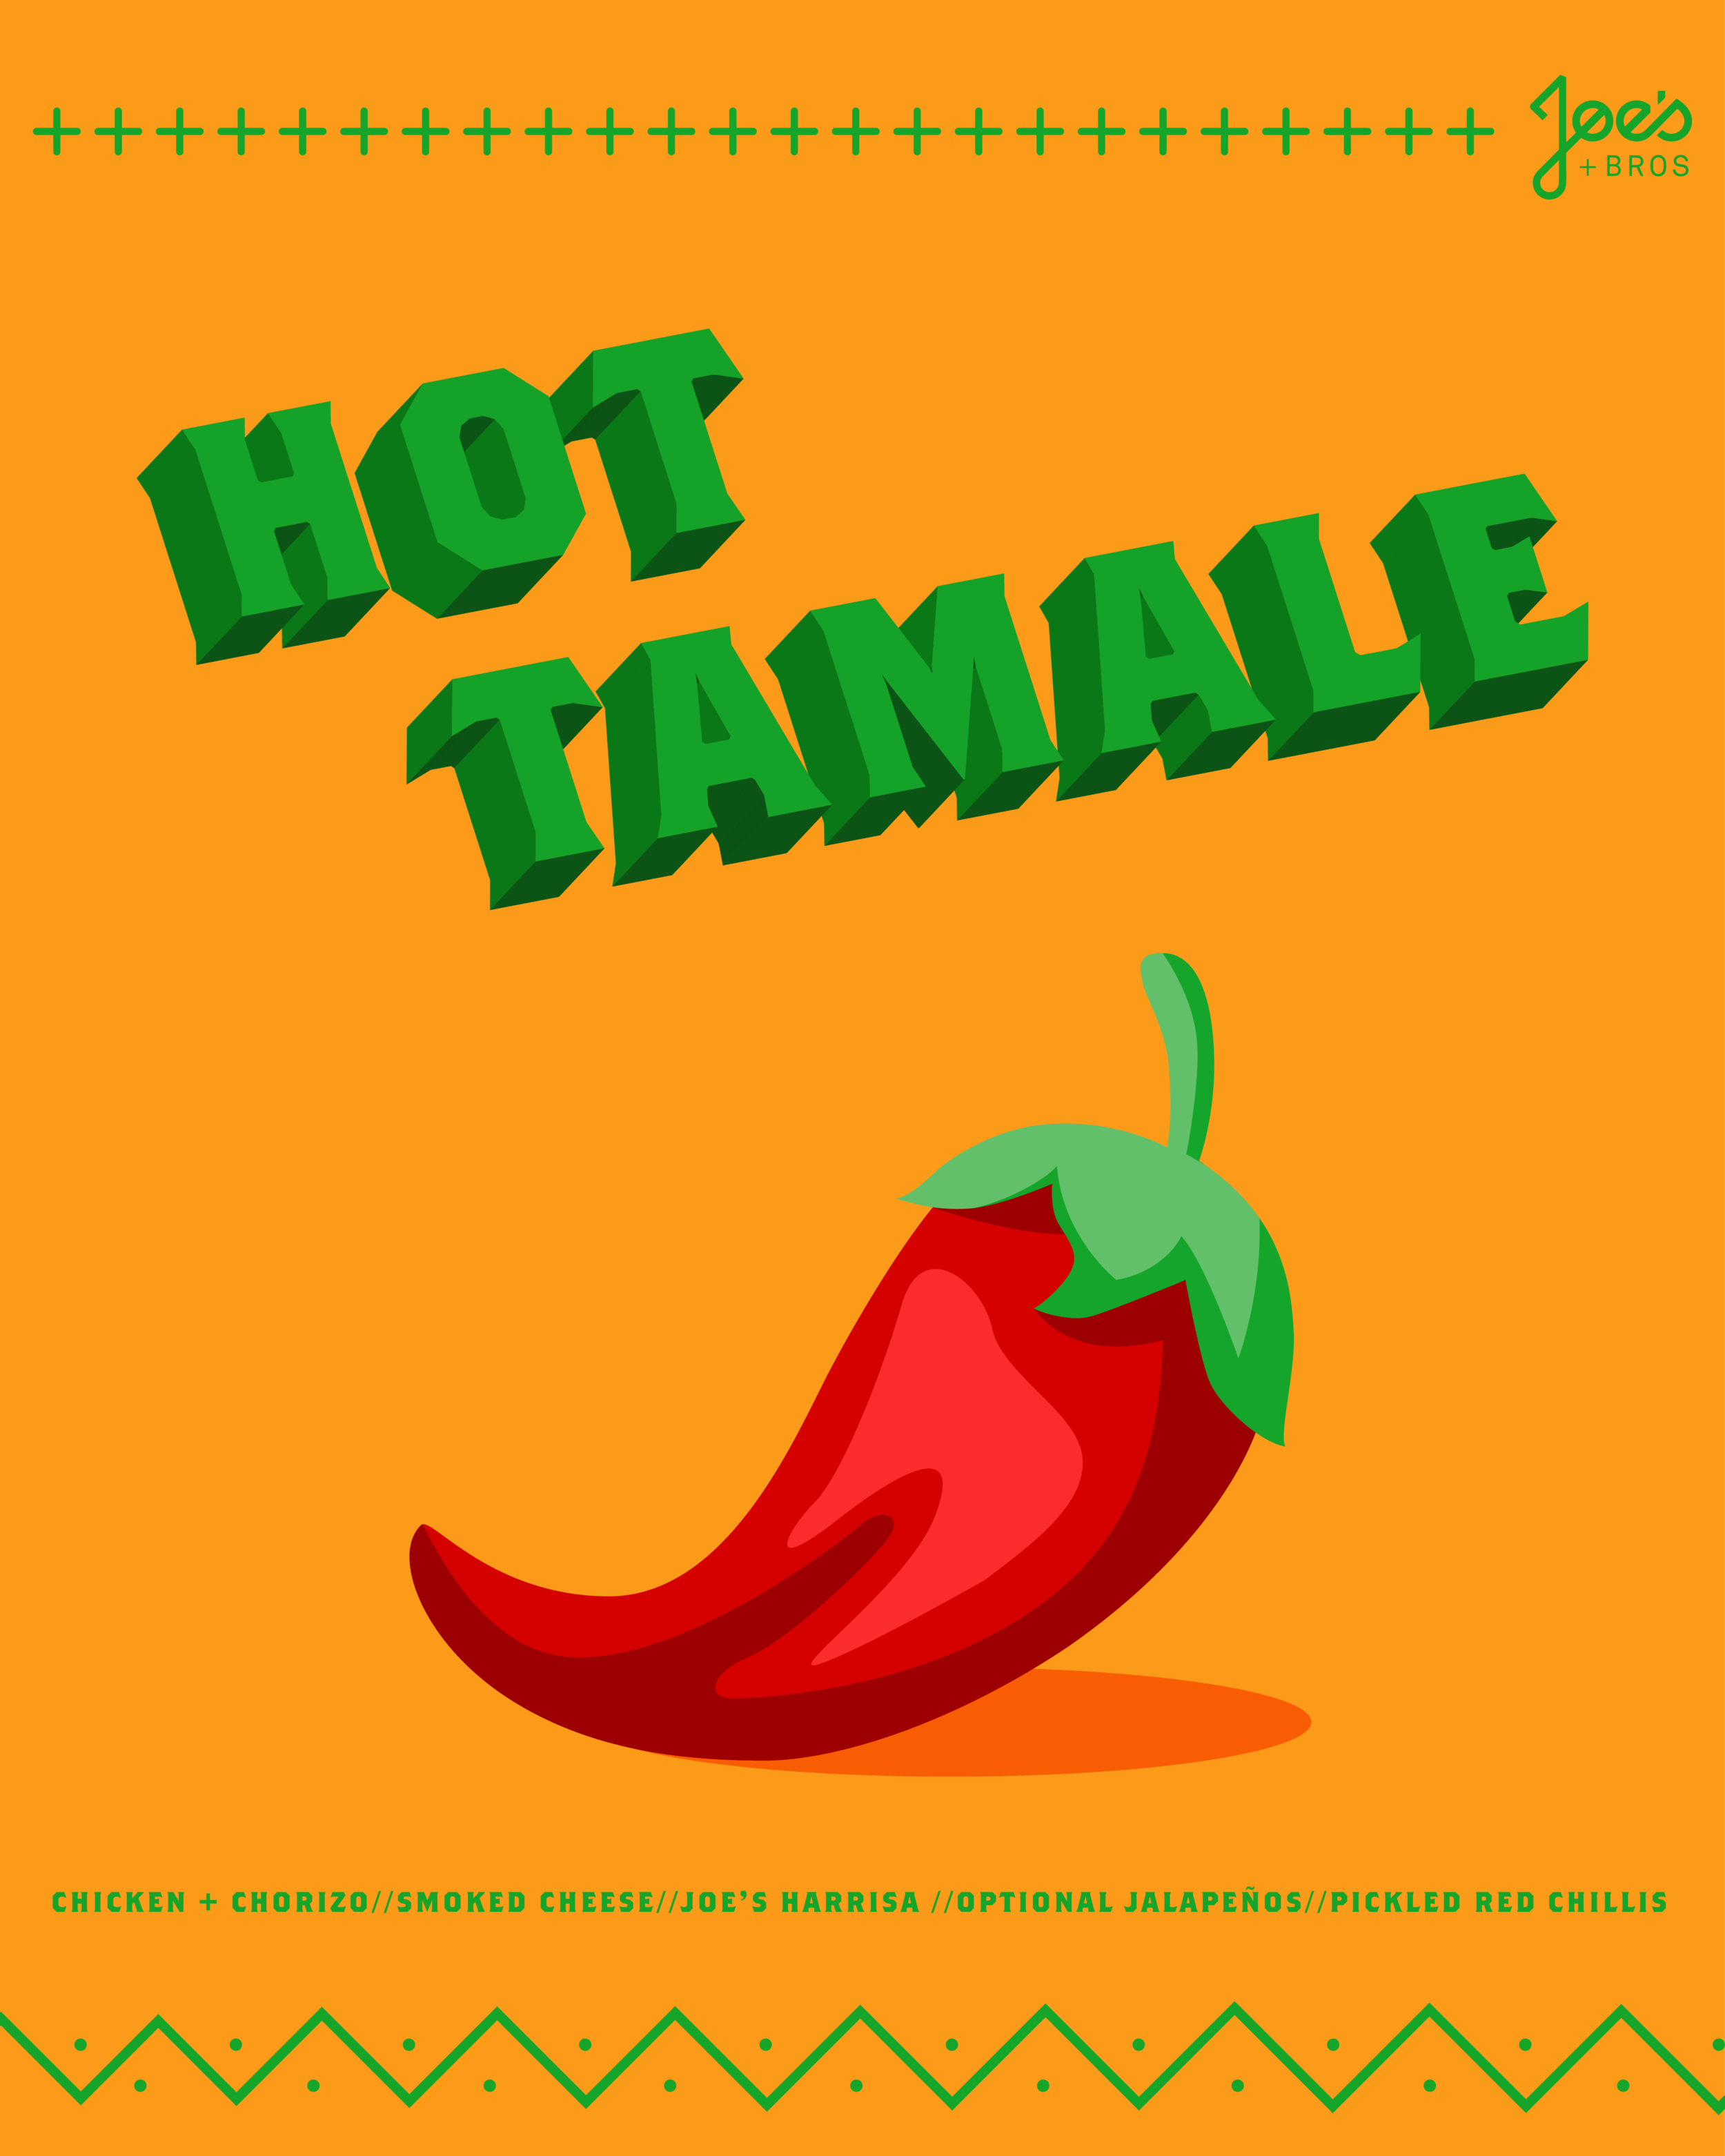 Joes&Bros Hot Tamale Insta Post 1080x1350 v01-01.png